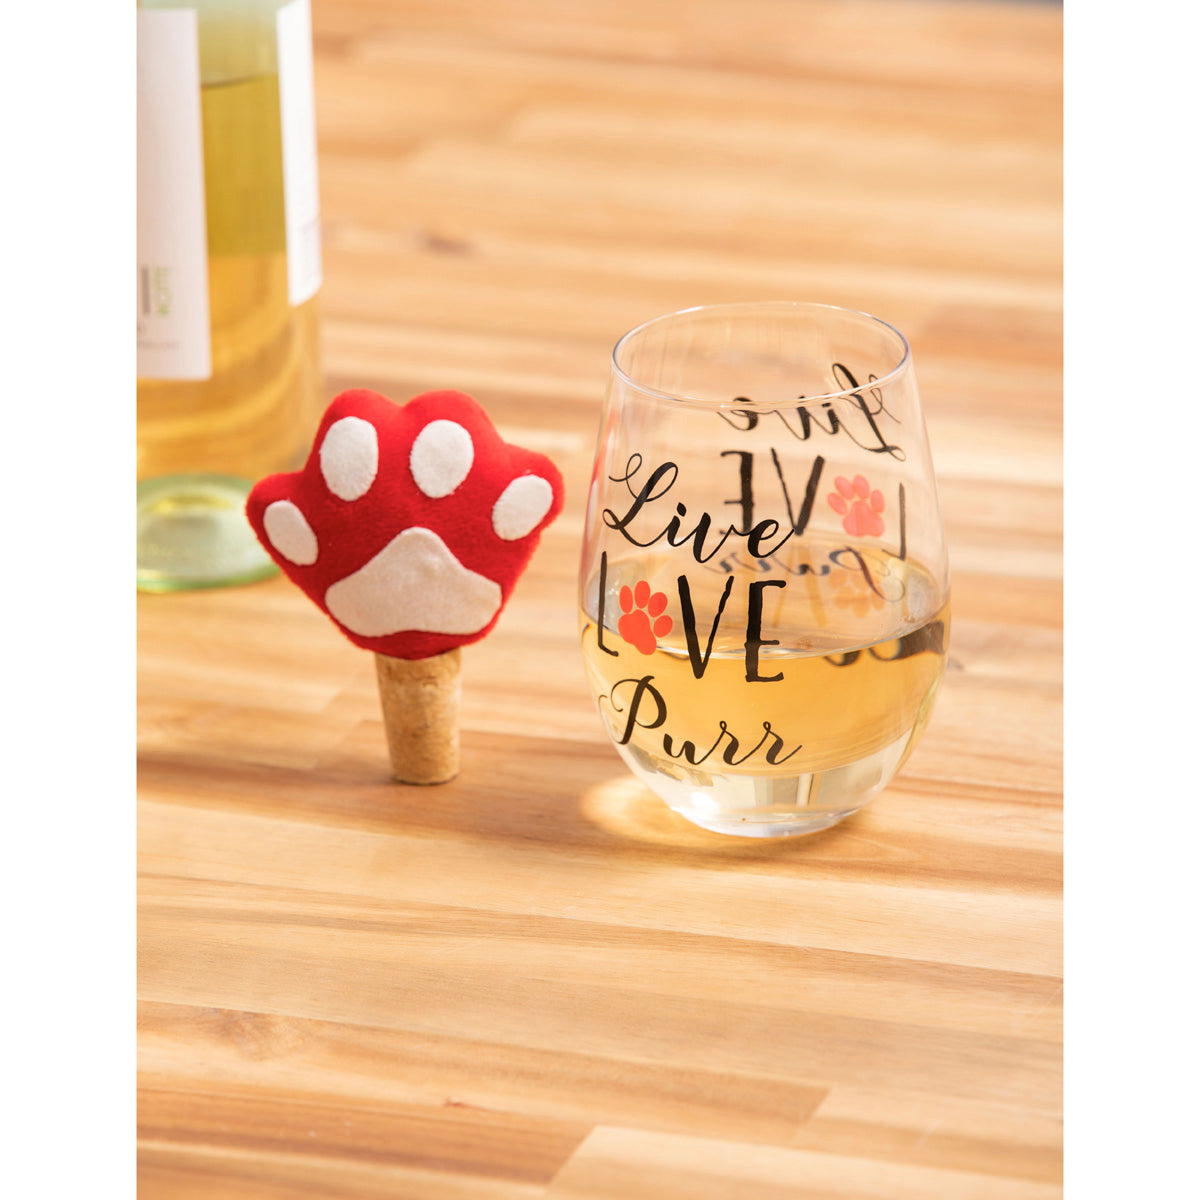 Cat Stemless Glass with Paw Print Stopper